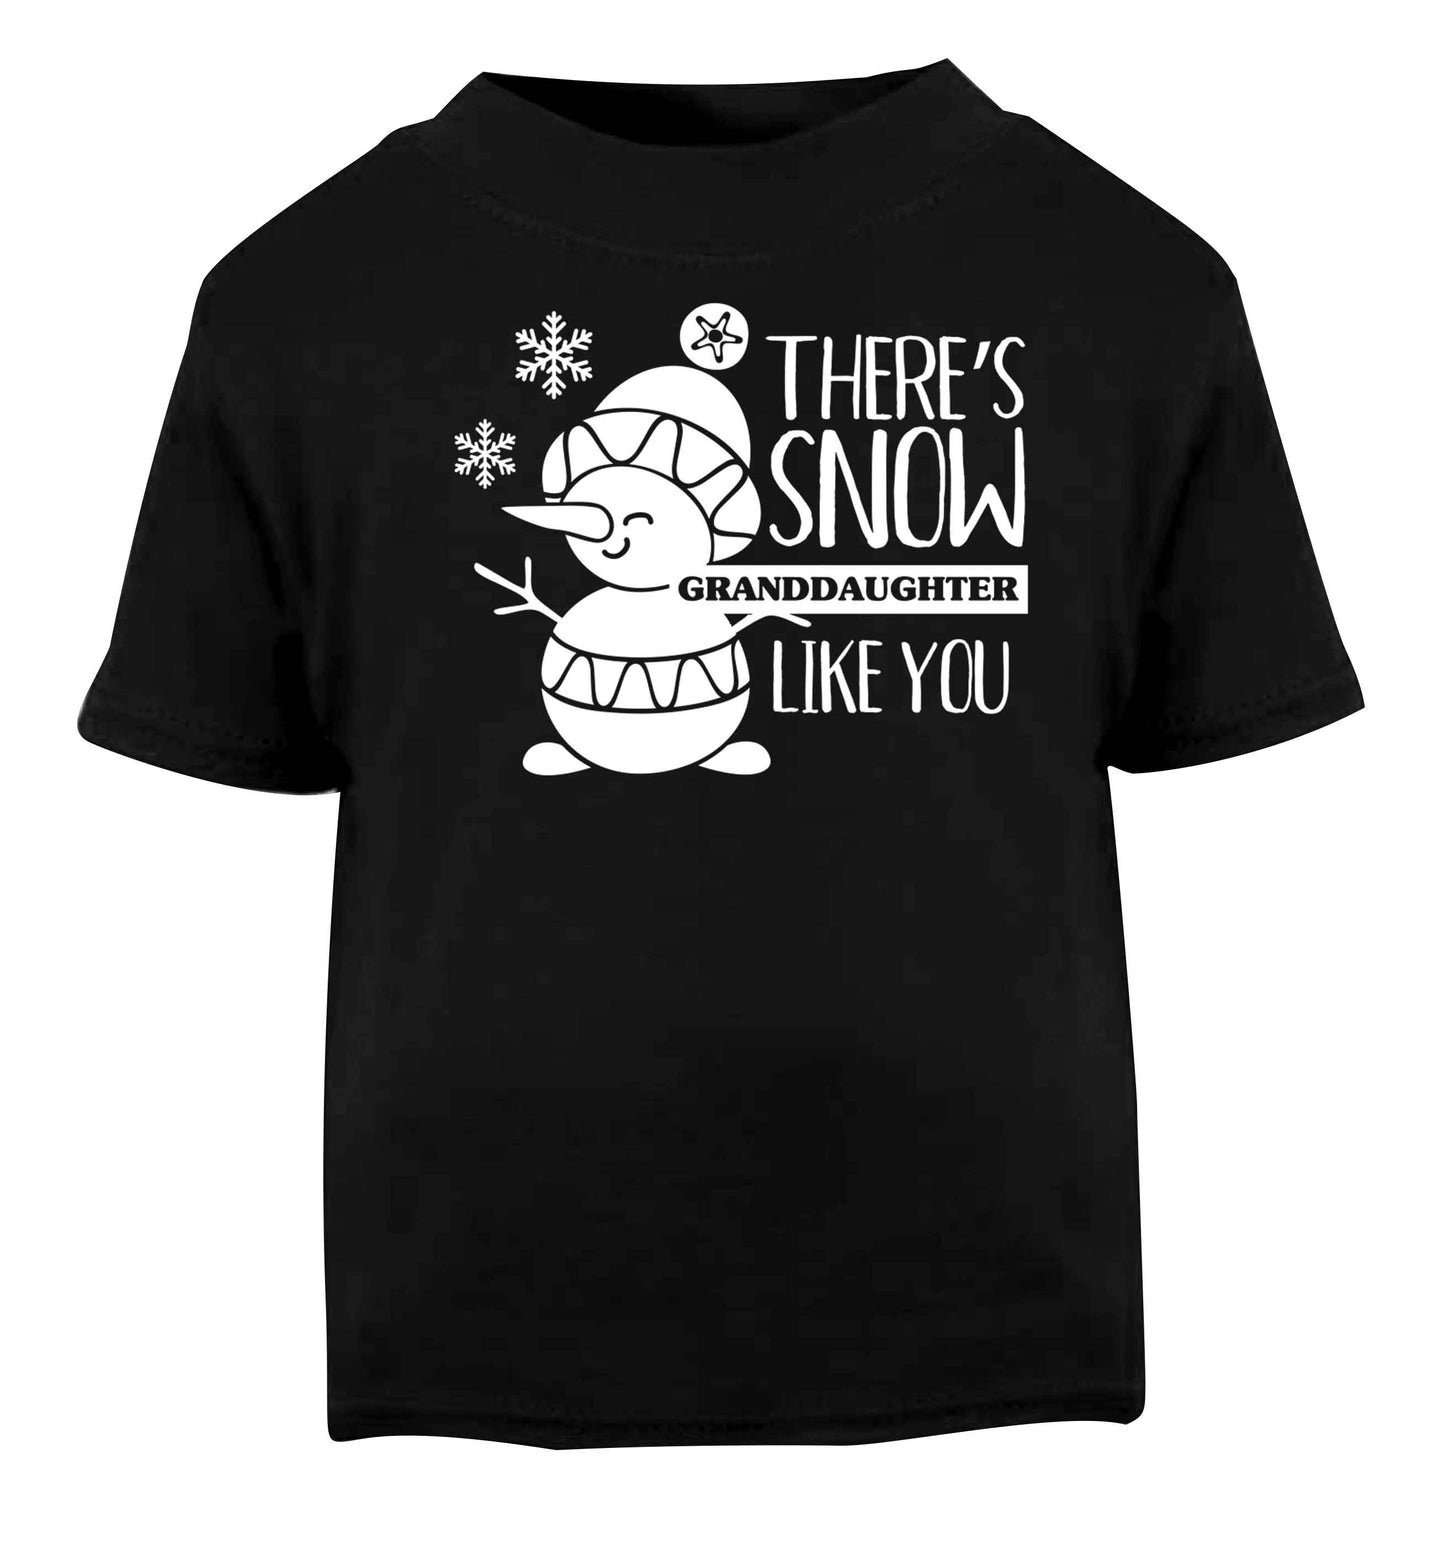 There's snow granddaughter like you Black baby toddler Tshirt 2 years